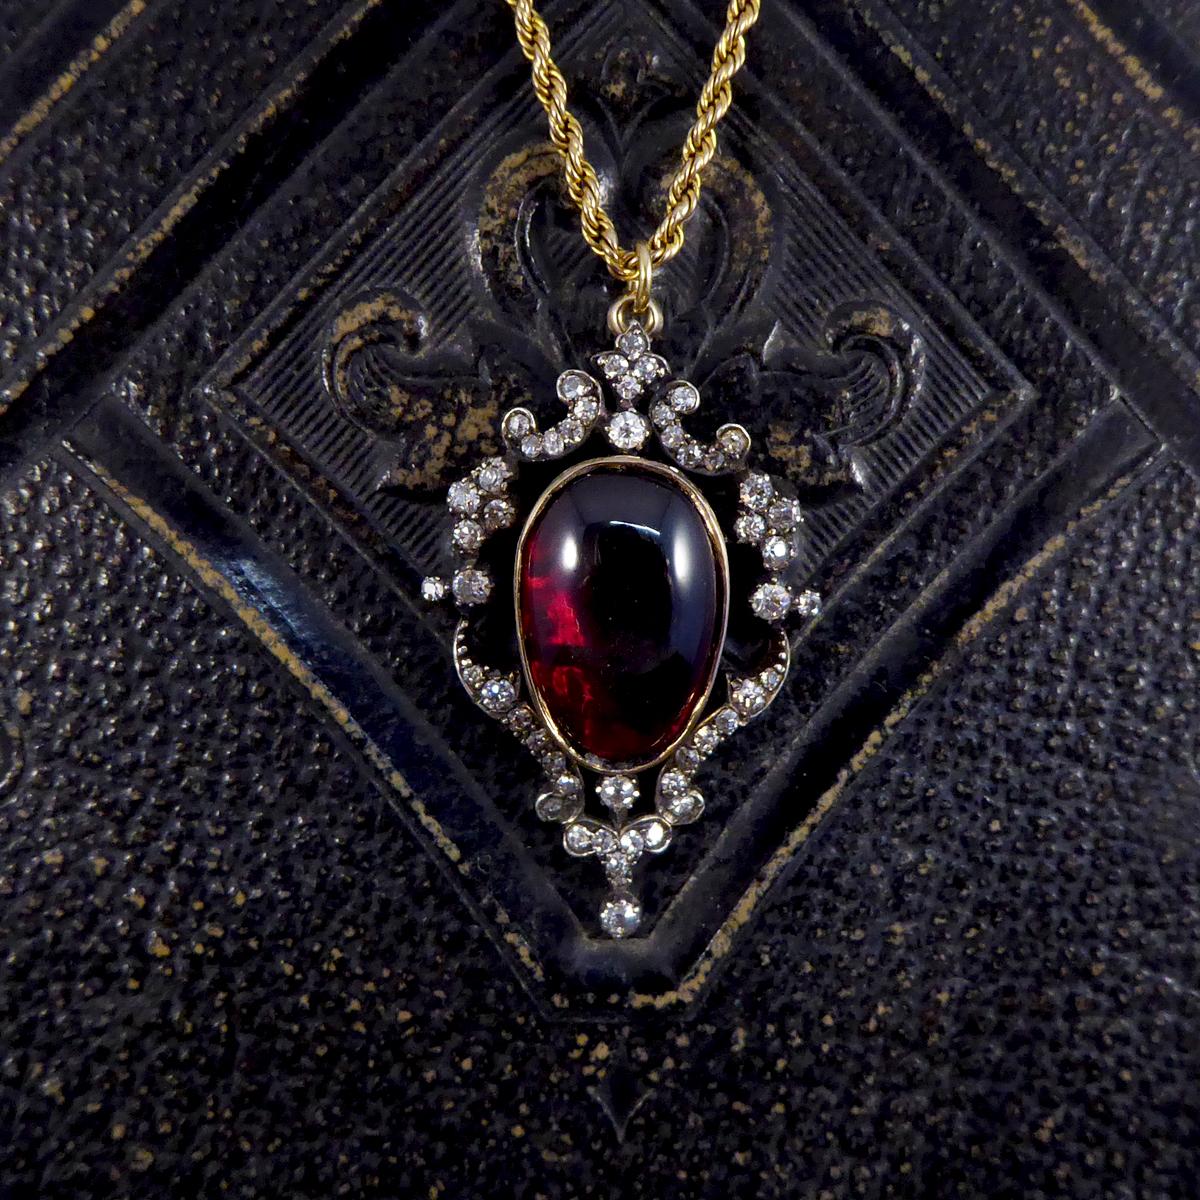 This gorgeous quality antique pendant holds a large closed back collar set Cabochon Garnet with such a deep red colour to it. It has a decorative surround of small Old Cut Diamonds with a Silver top and Gold back. It is a lovely example of a antique